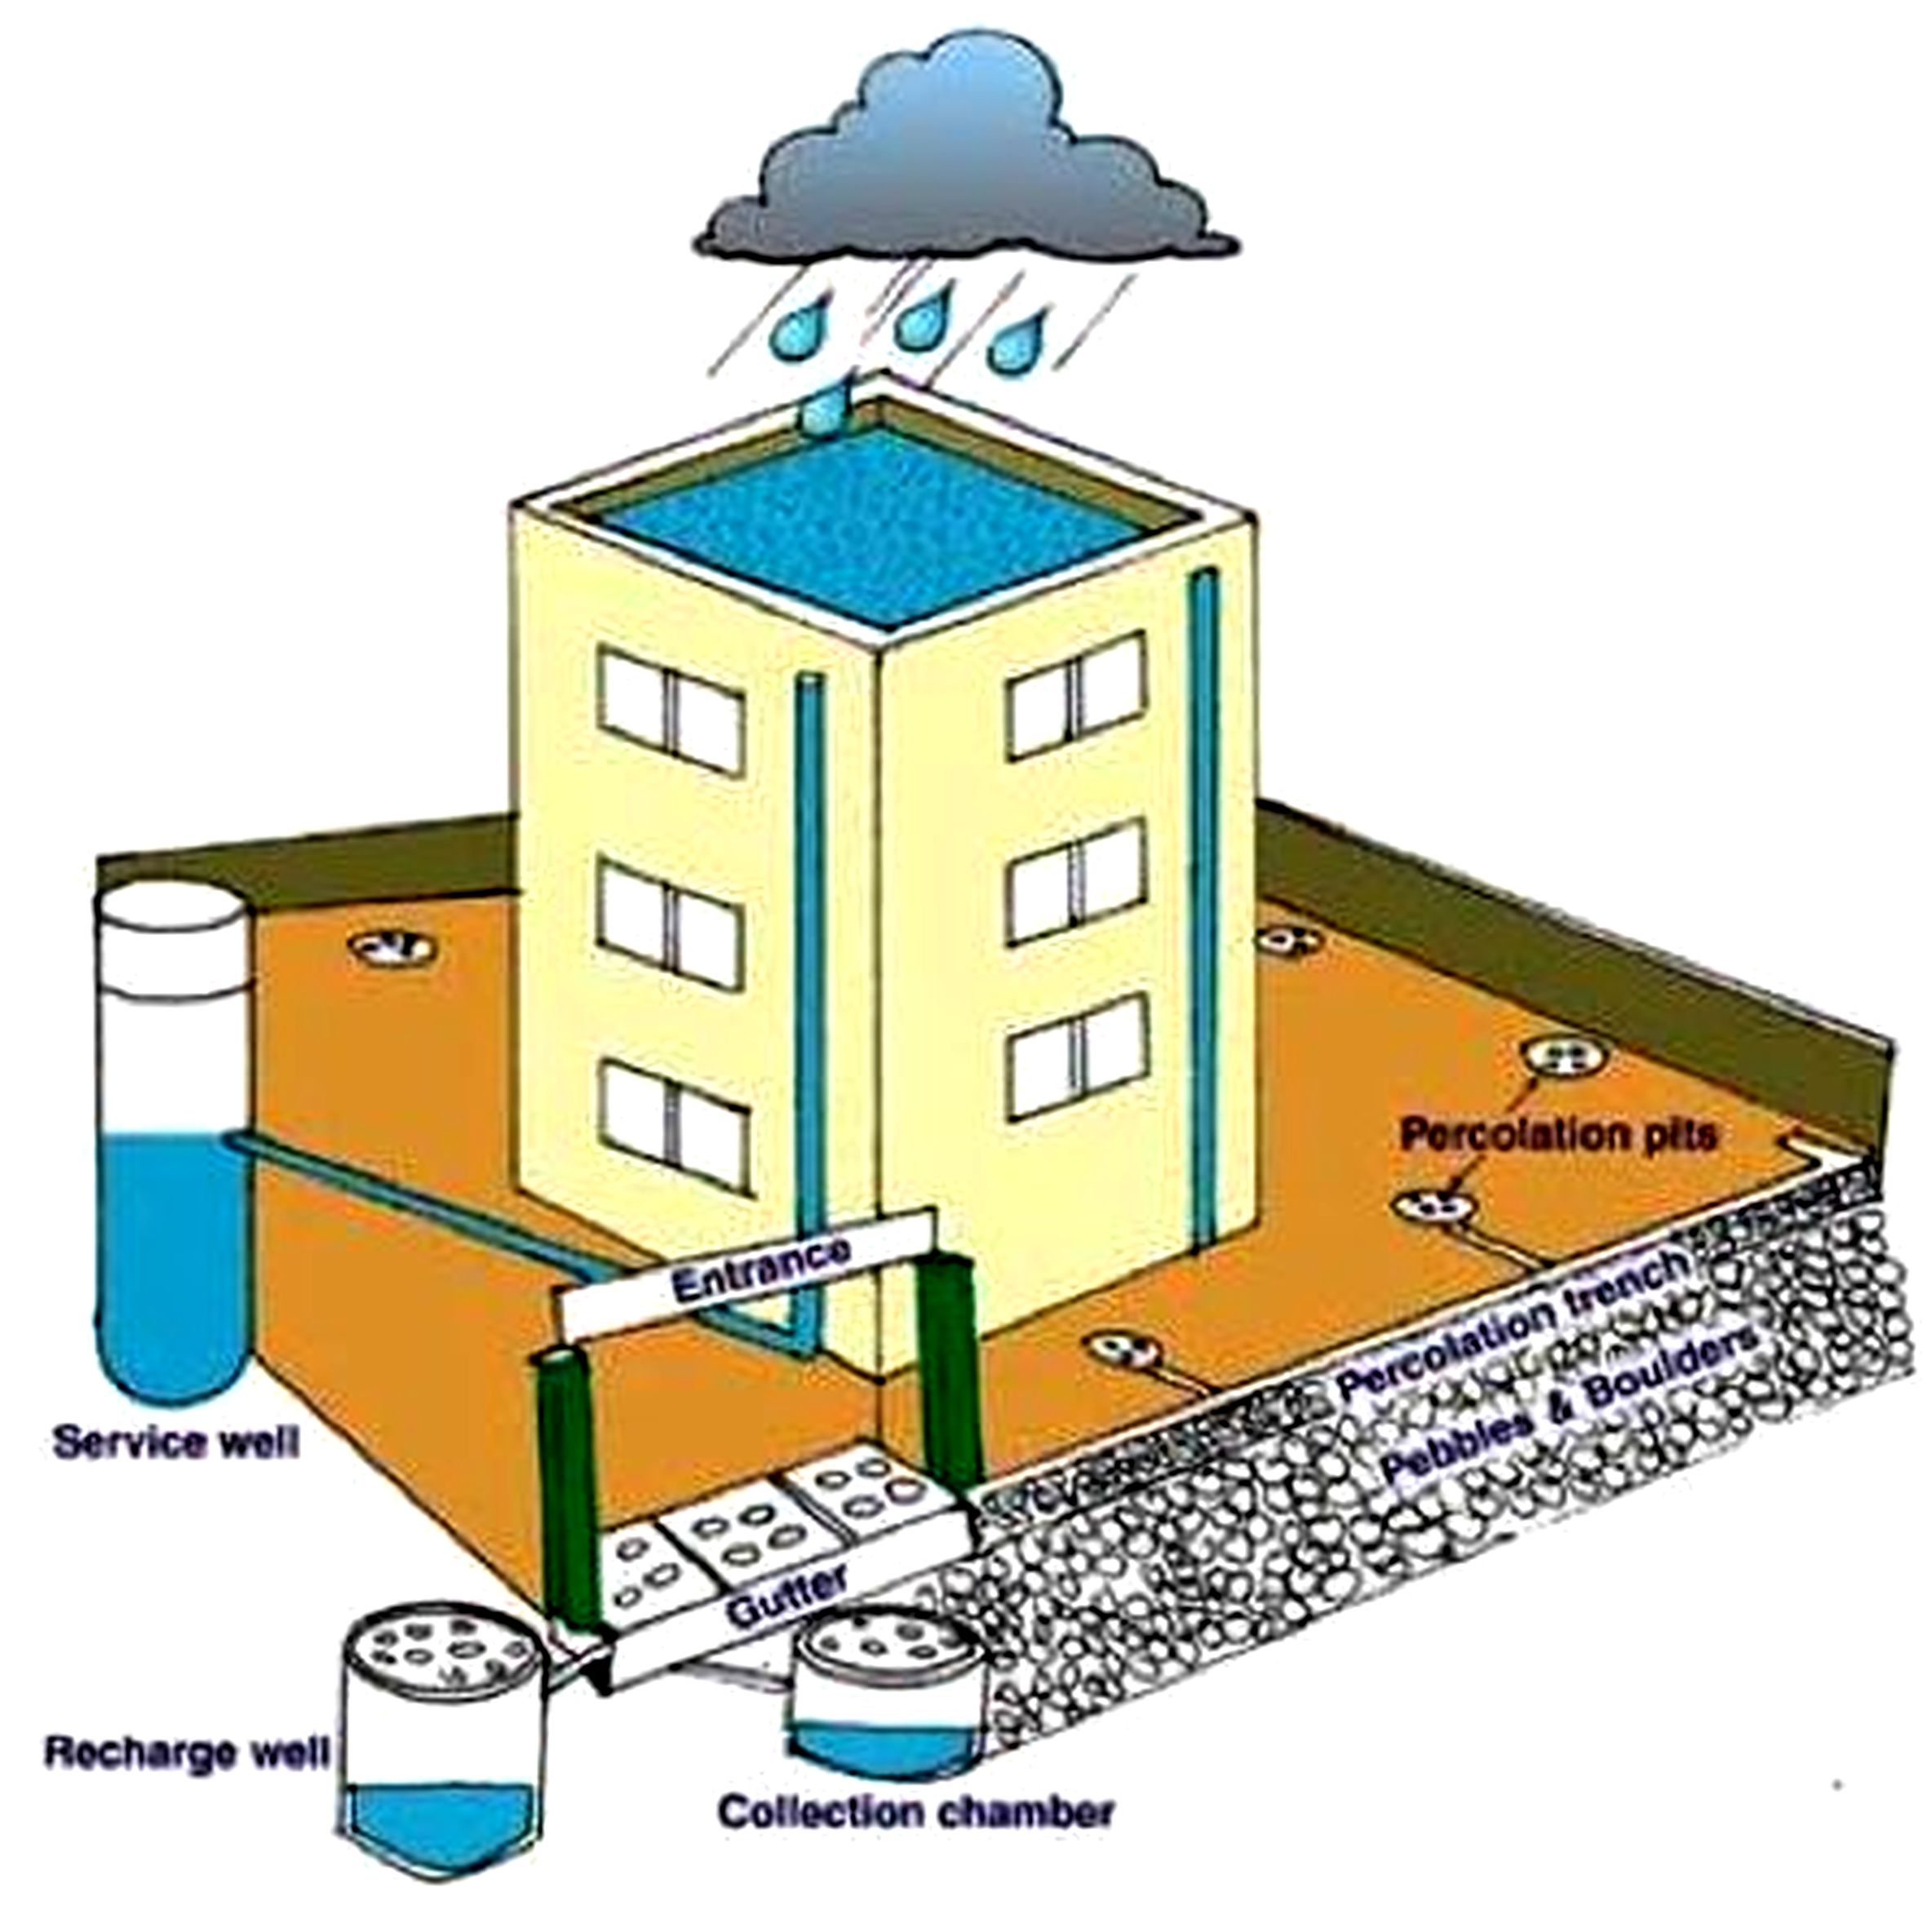 Roof water harvesting system